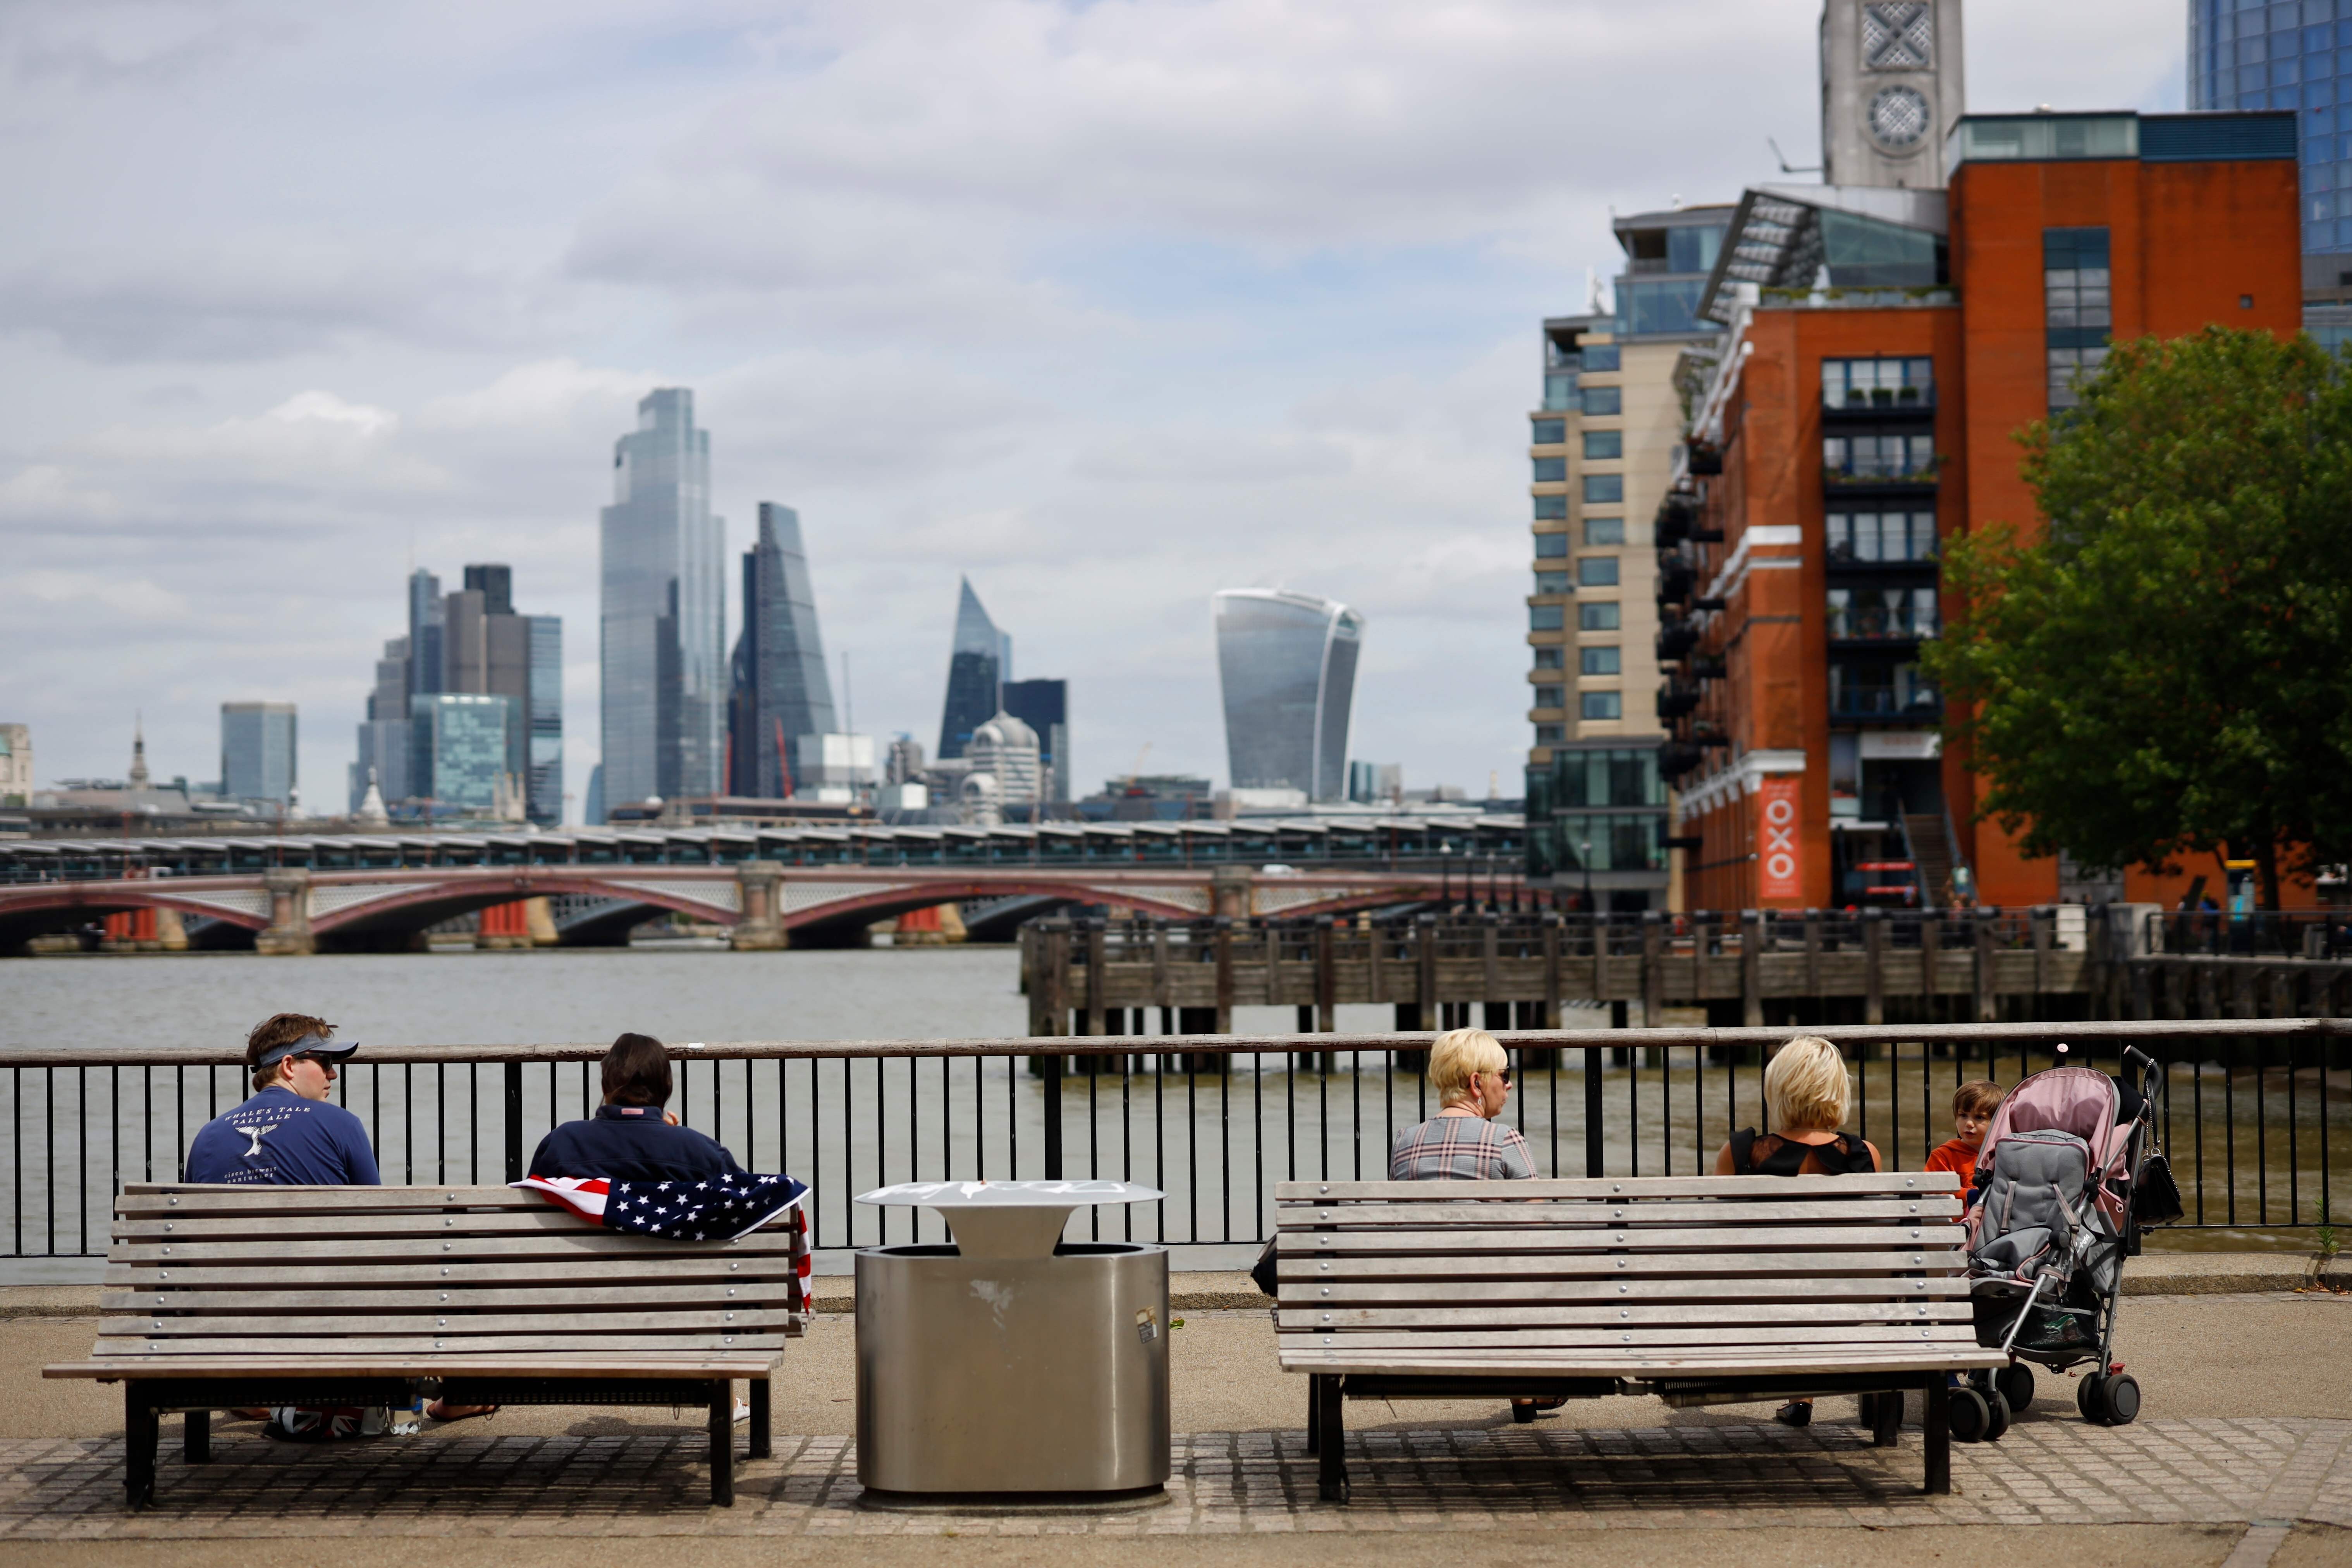 UK banks are notorious for being too conservative when it comes to property valuations, Raymond Chong says. Photo: AFP